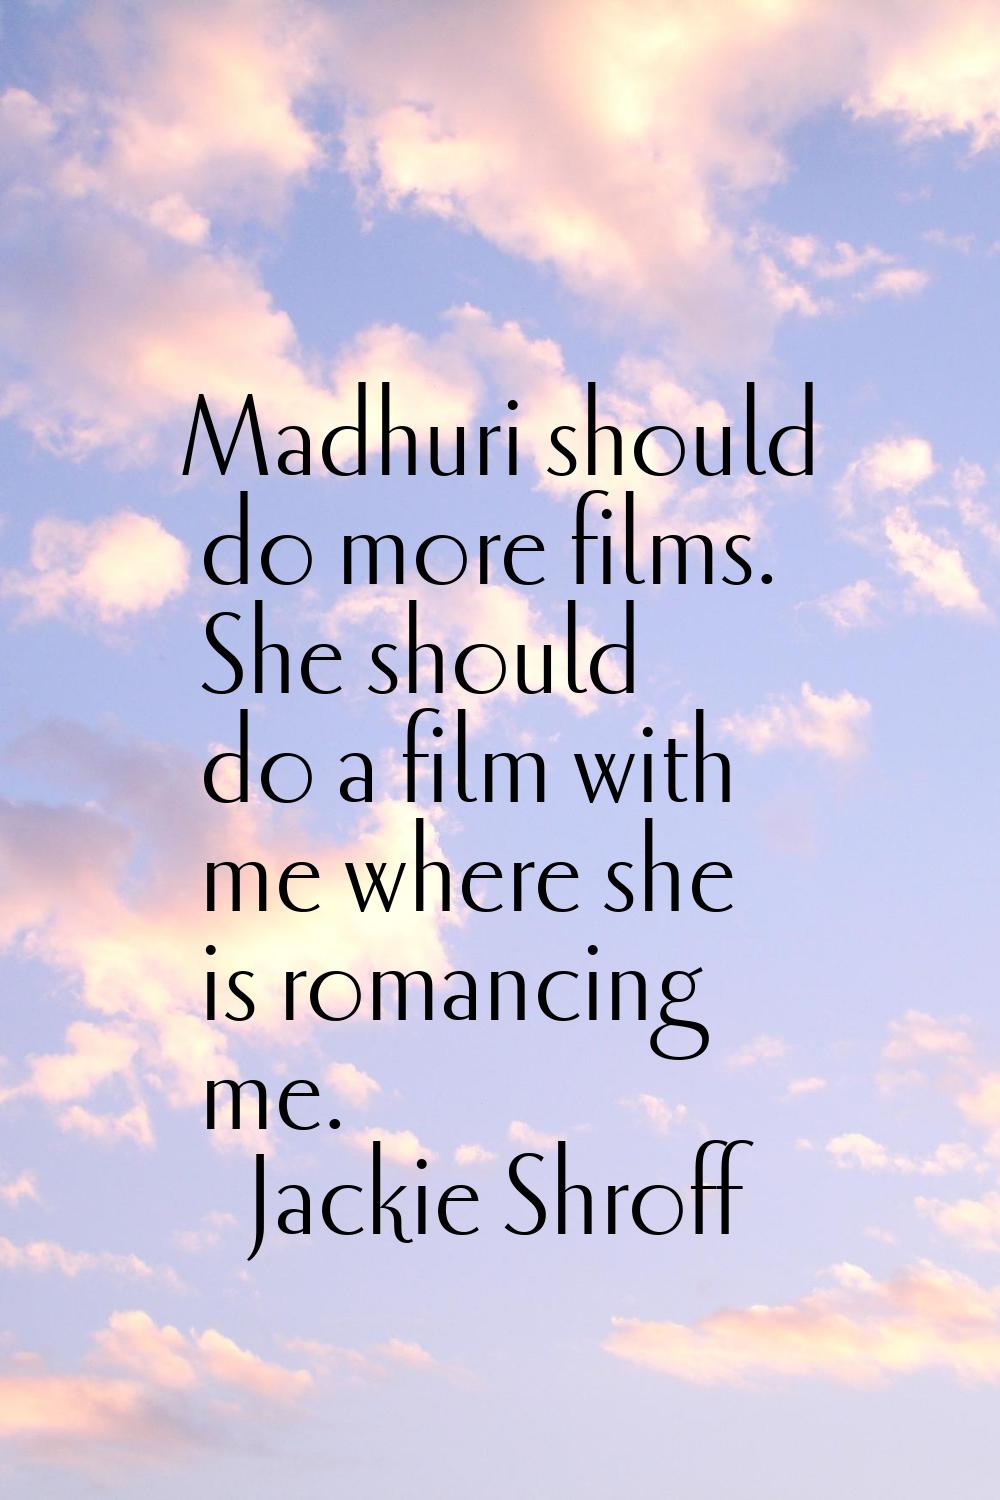 Madhuri should do more films. She should do a film with me where she is romancing me.